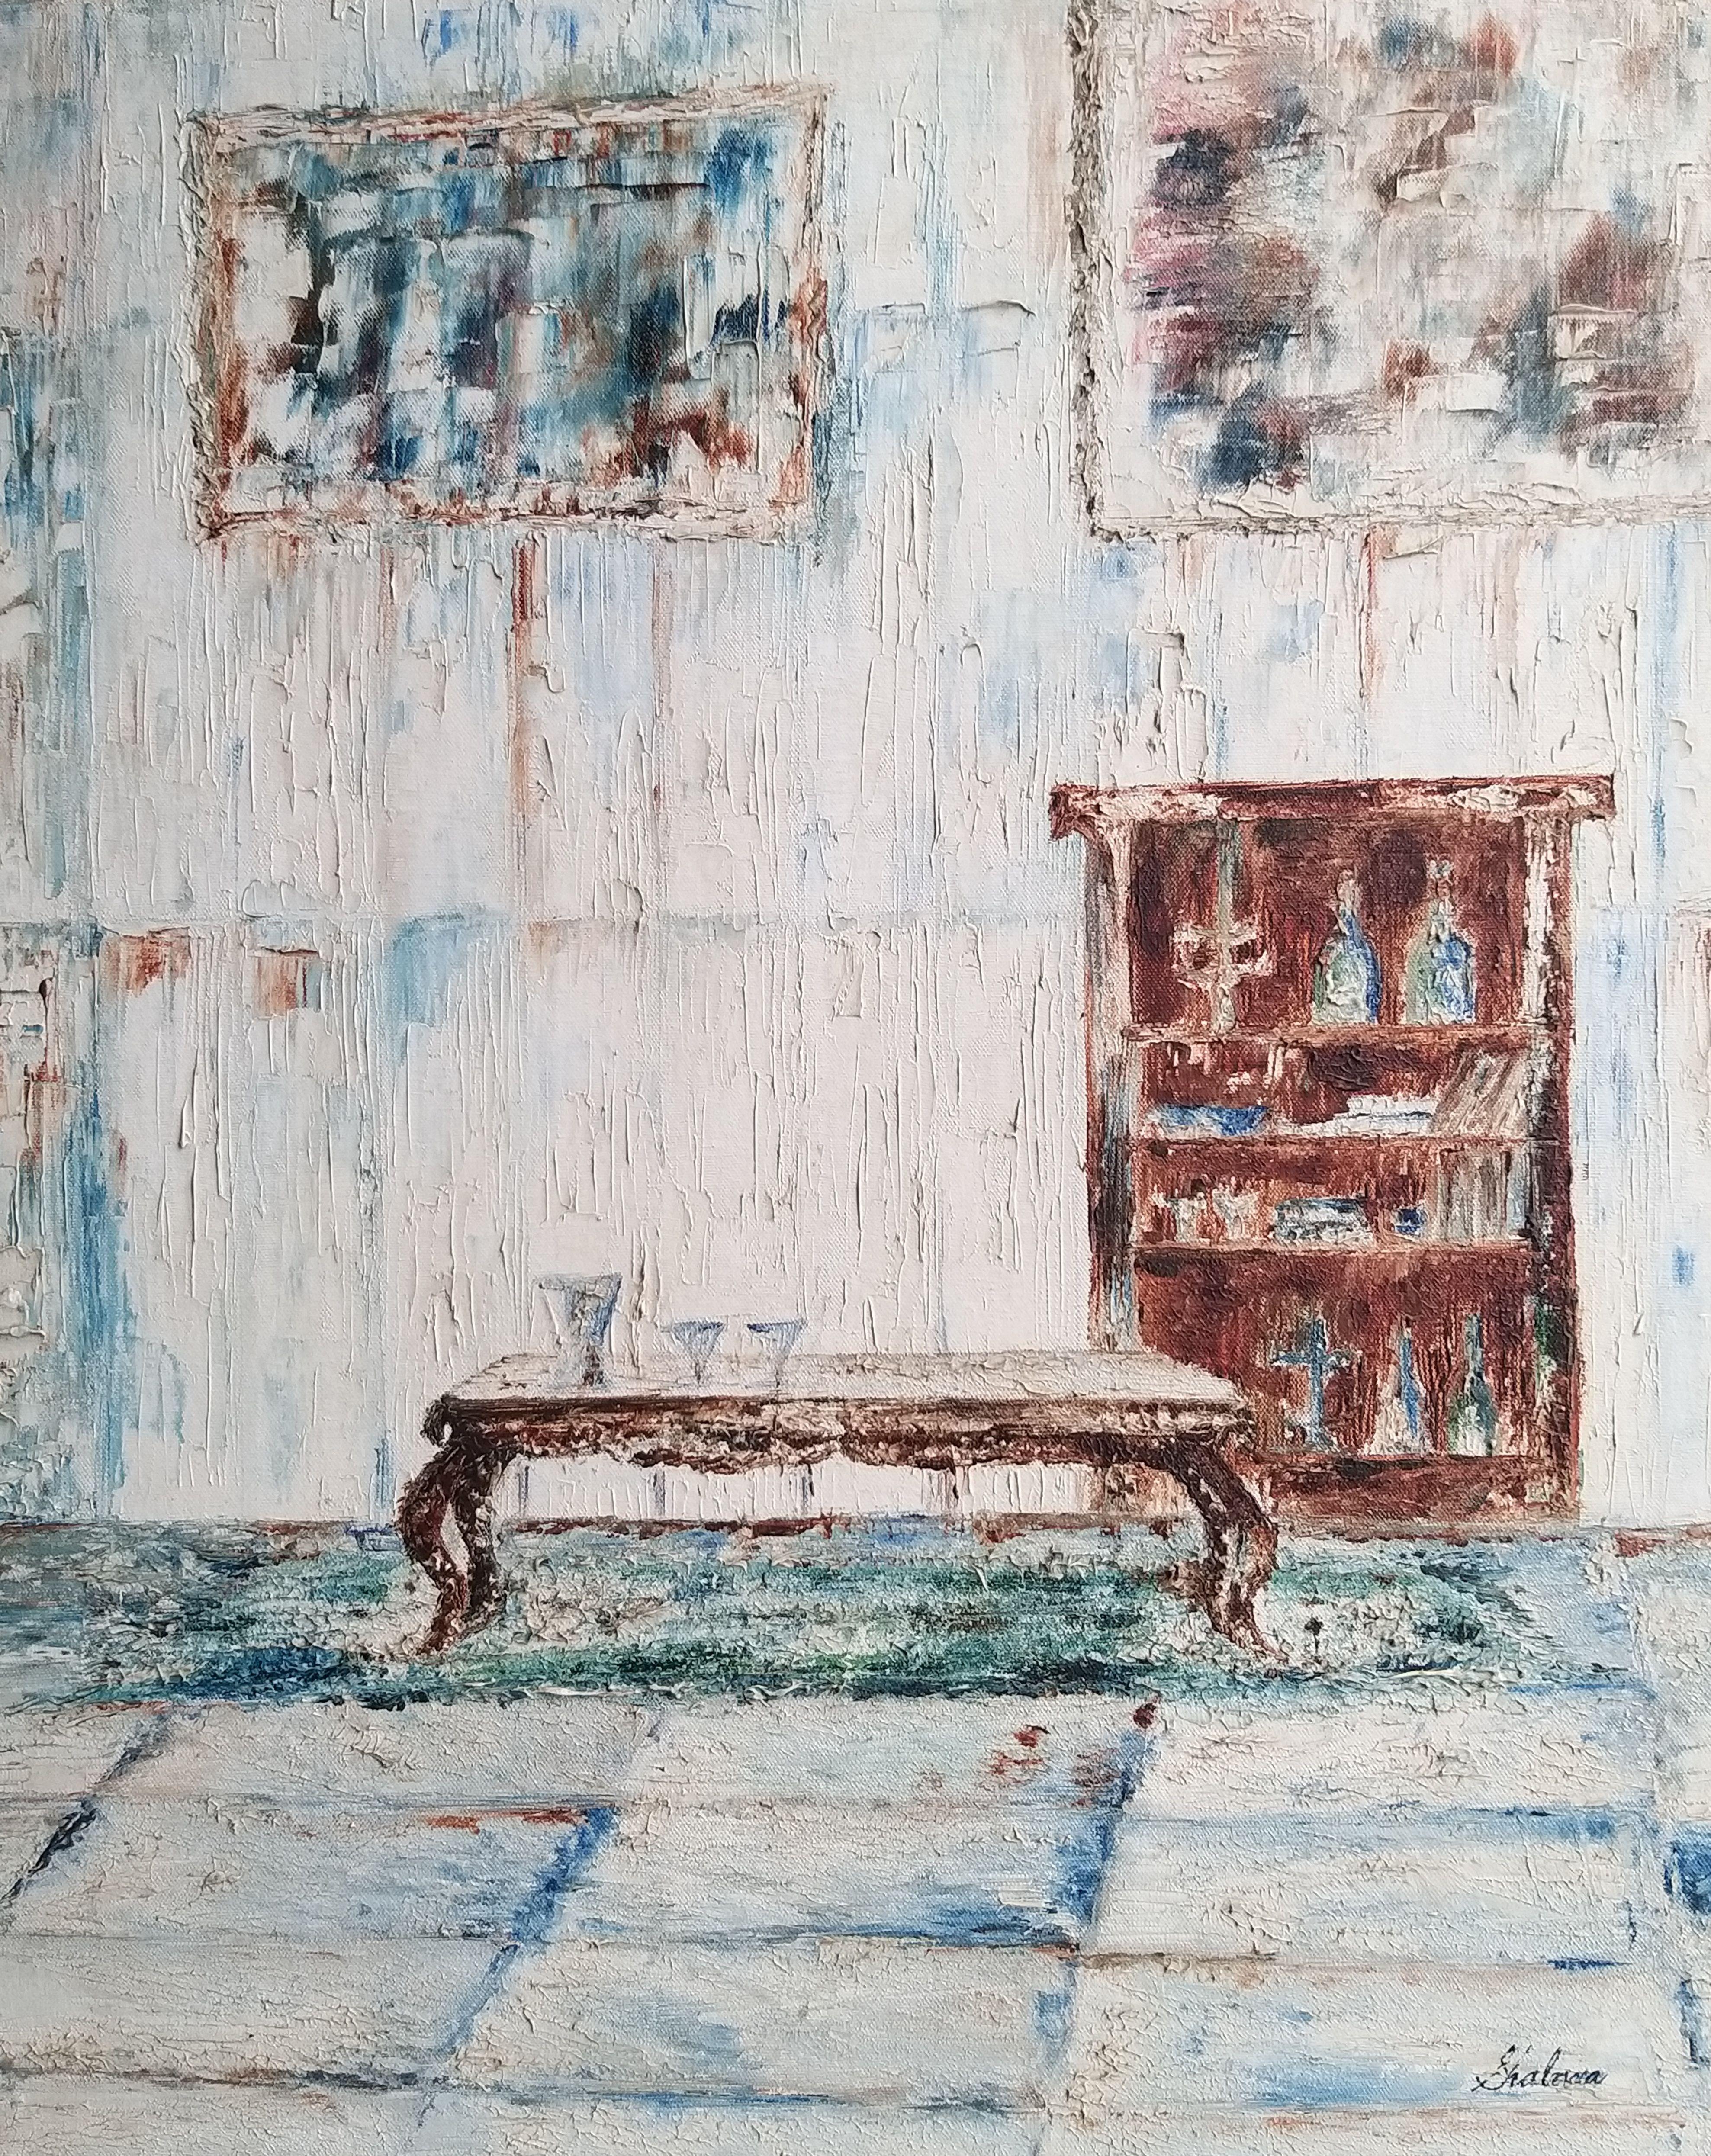   Artwork portrays the timeless beauty of the wooden table , cupboard, books , candle stands, glasses, carpet and the interiors.  Colors are smeared on the canvas using a knife to create a deeply textured rough raw unfinished look.  Painting is